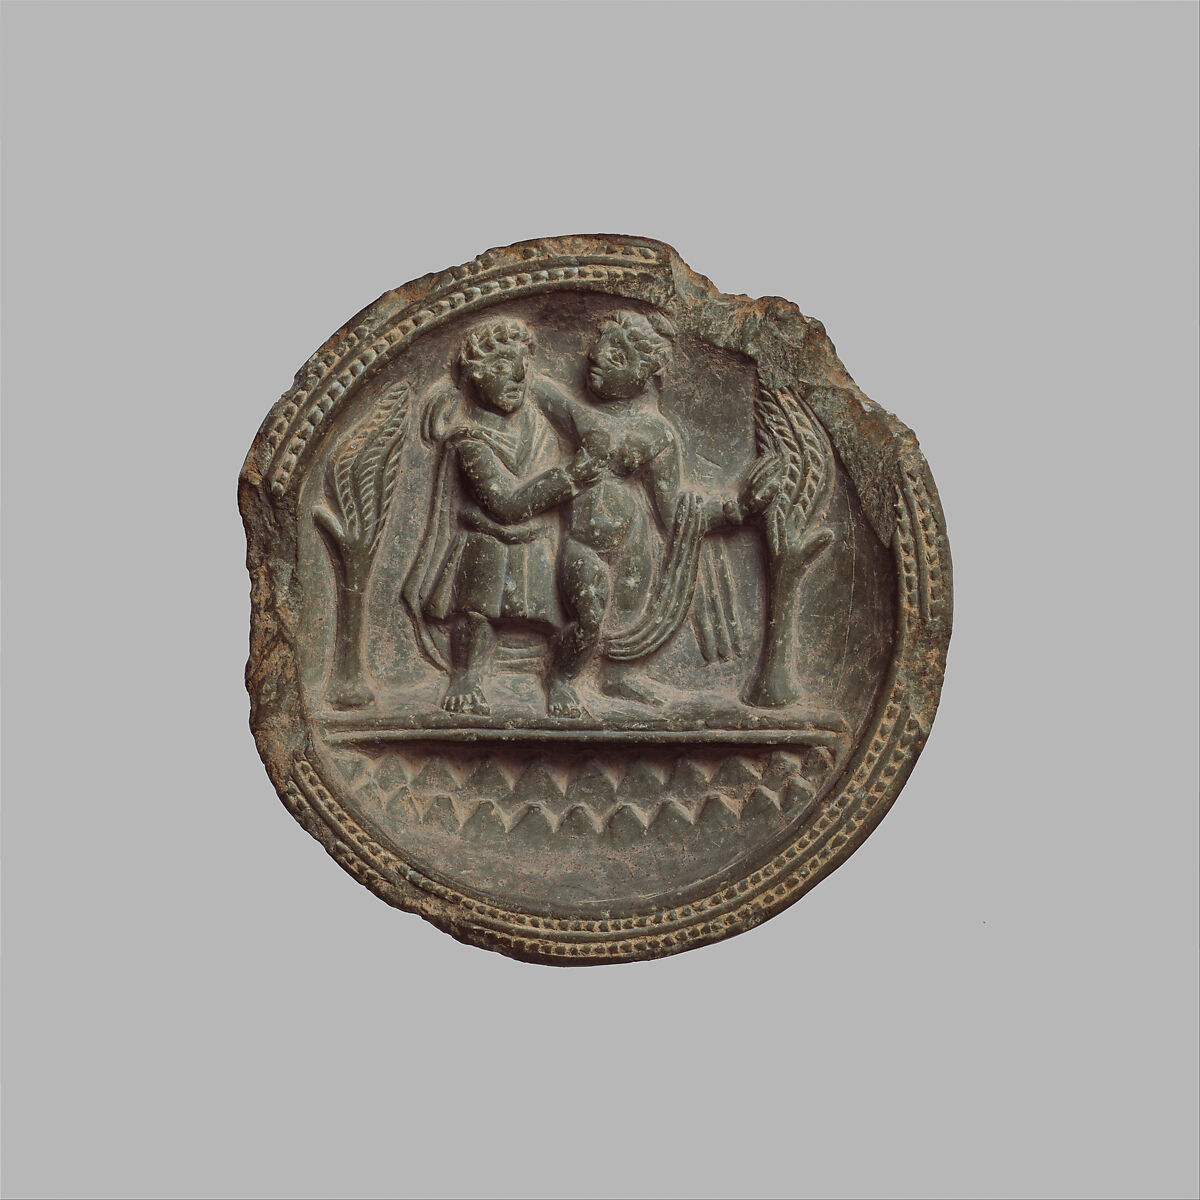 Dish with a Mythological Couple (Perhaps Apollo and Daphne), Schist, Pakistan (ancient region of Gandhara) 